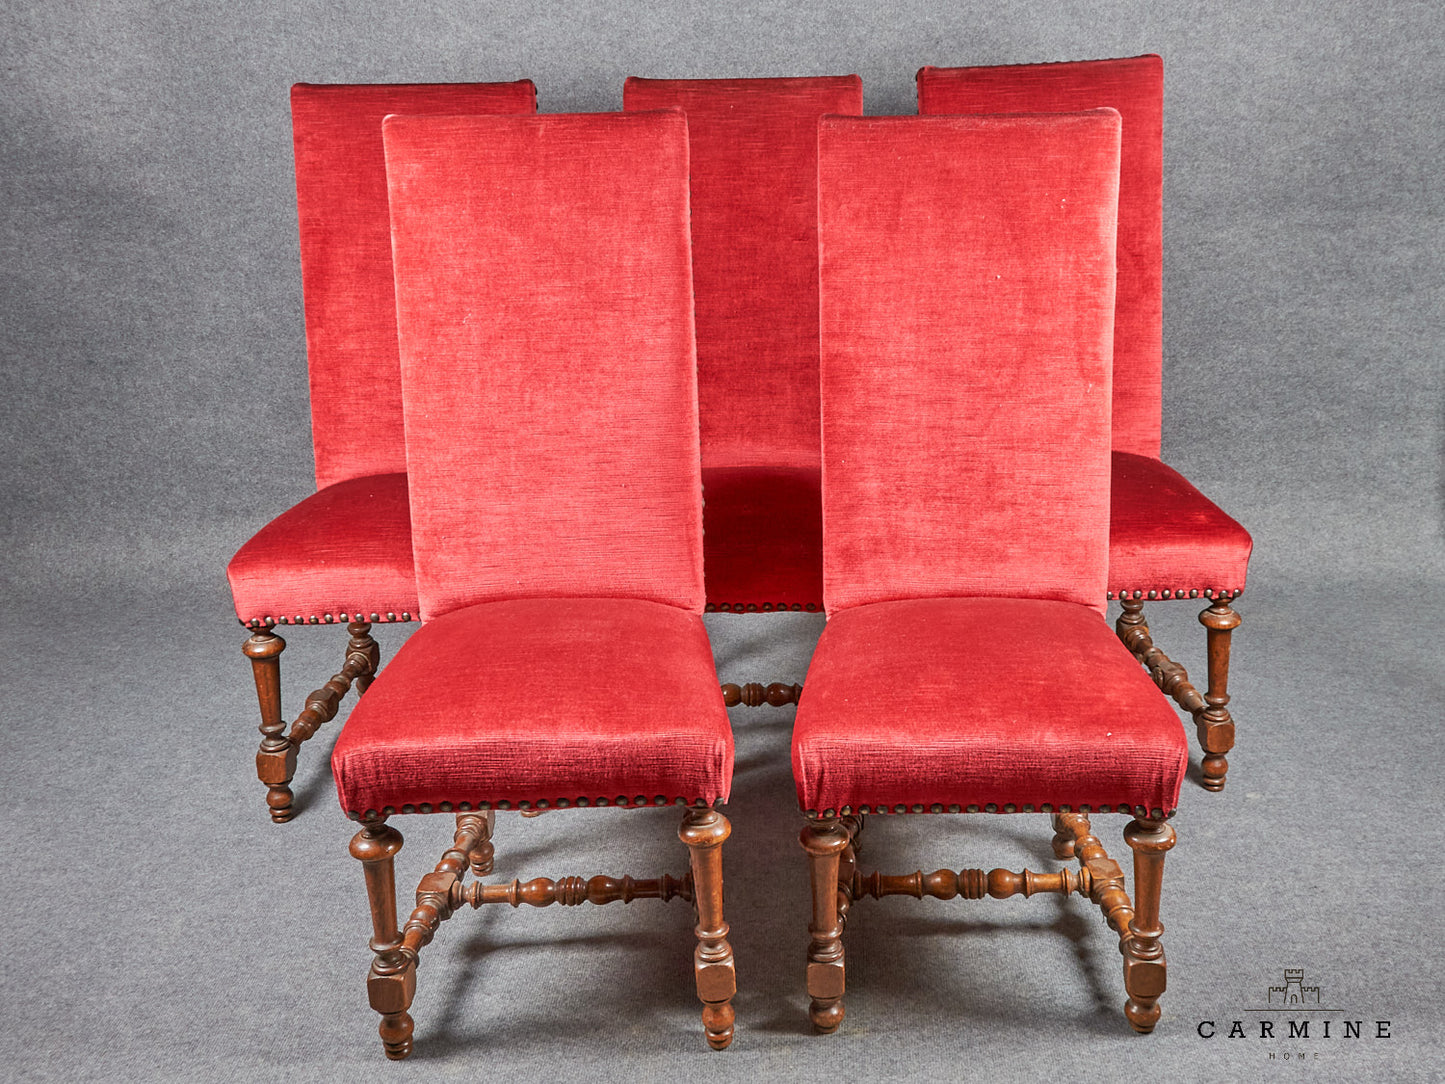 Set of 5 red chairs